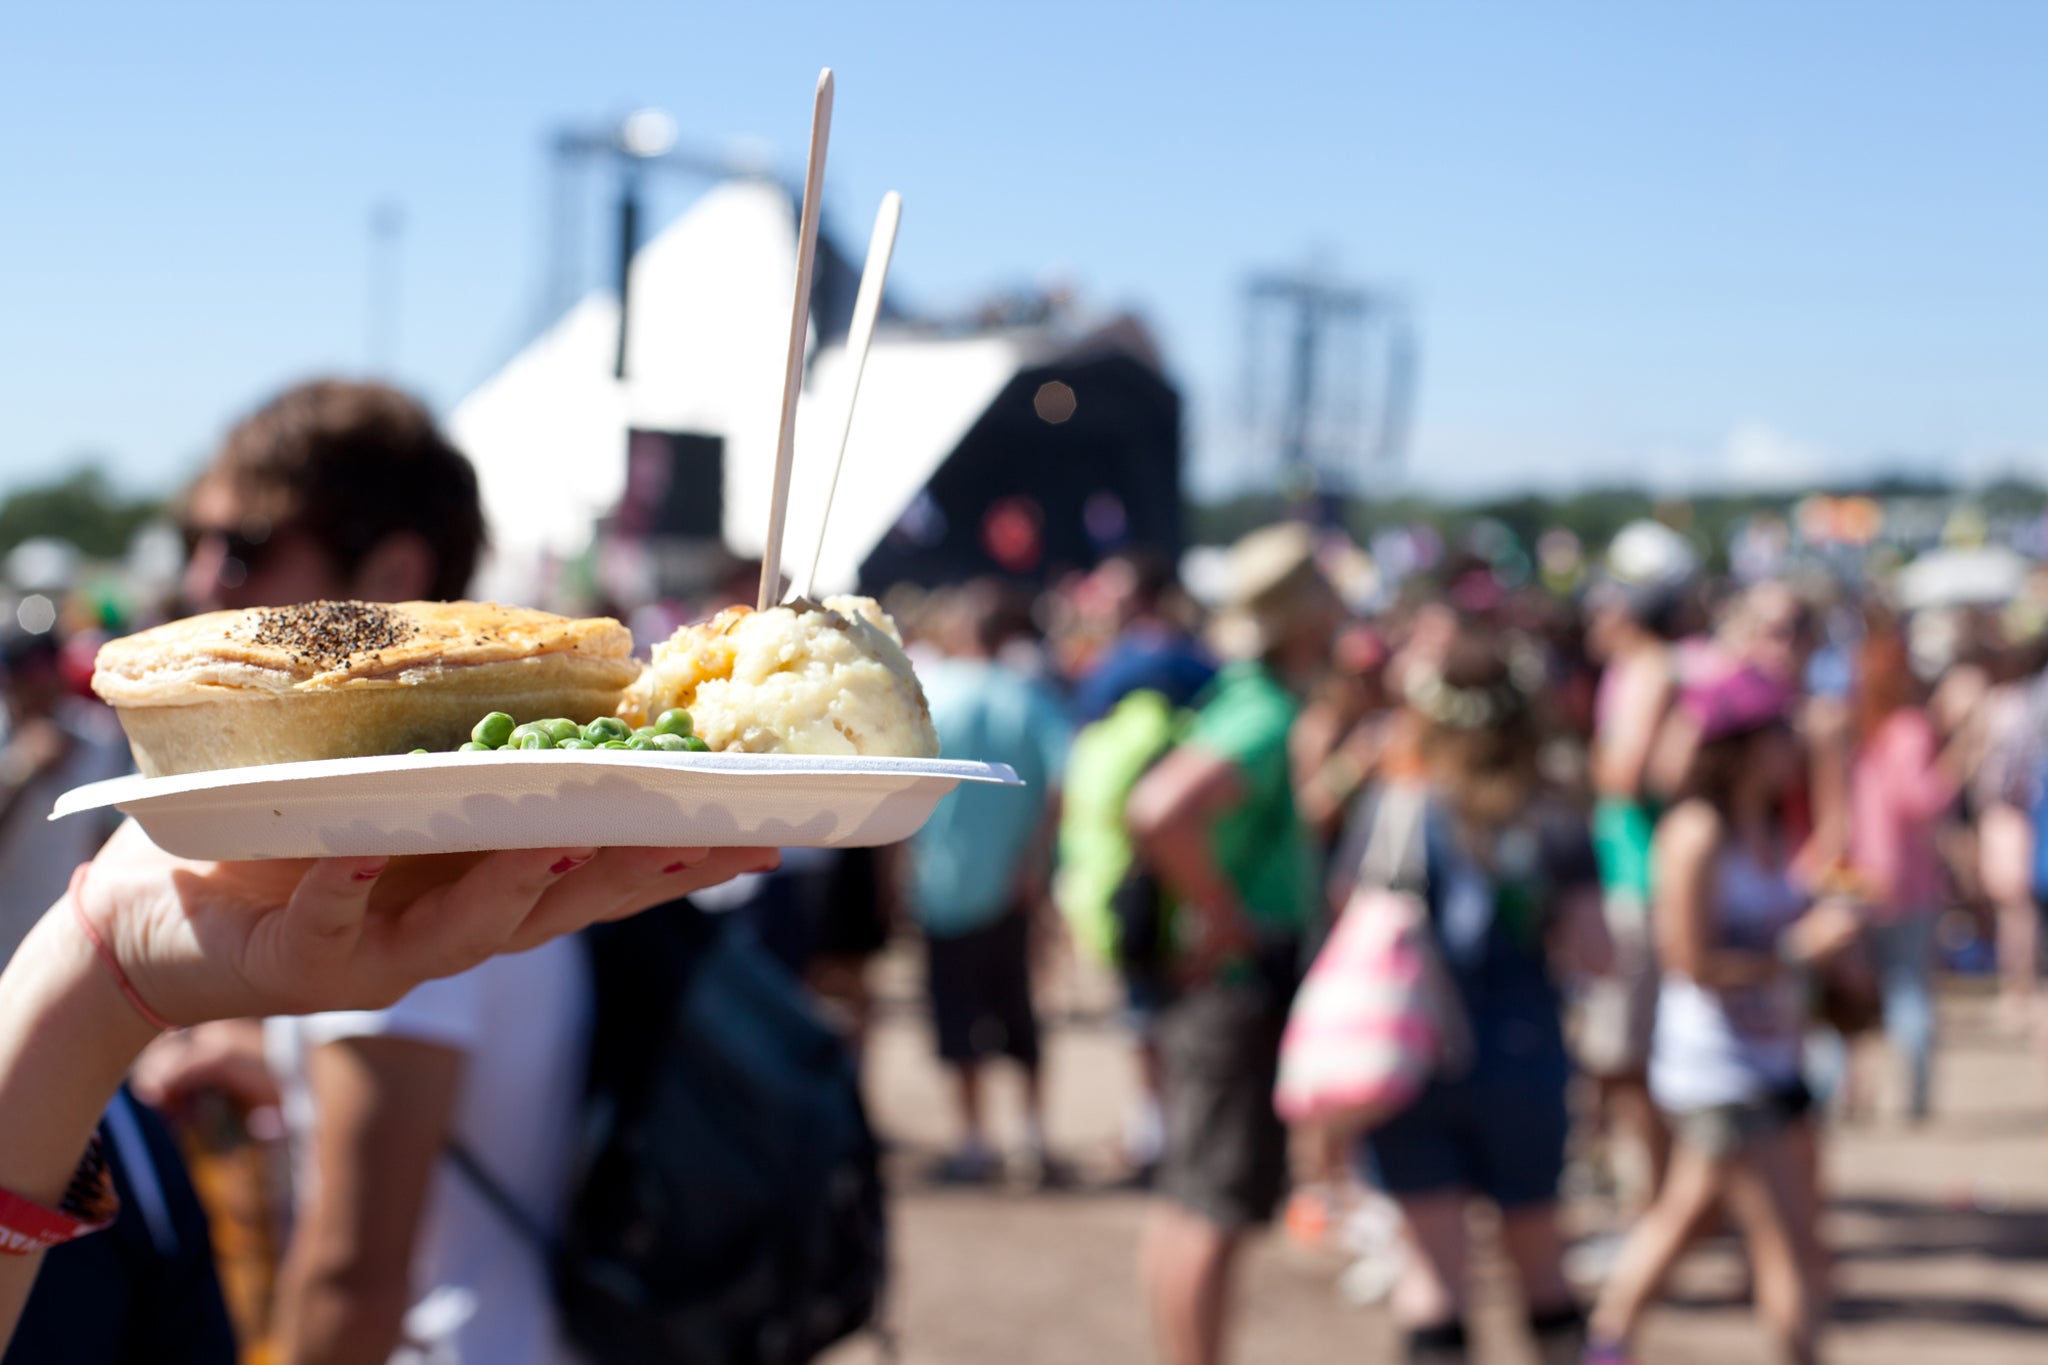 The food line-up at Glastonbury 2015 looks better than ever